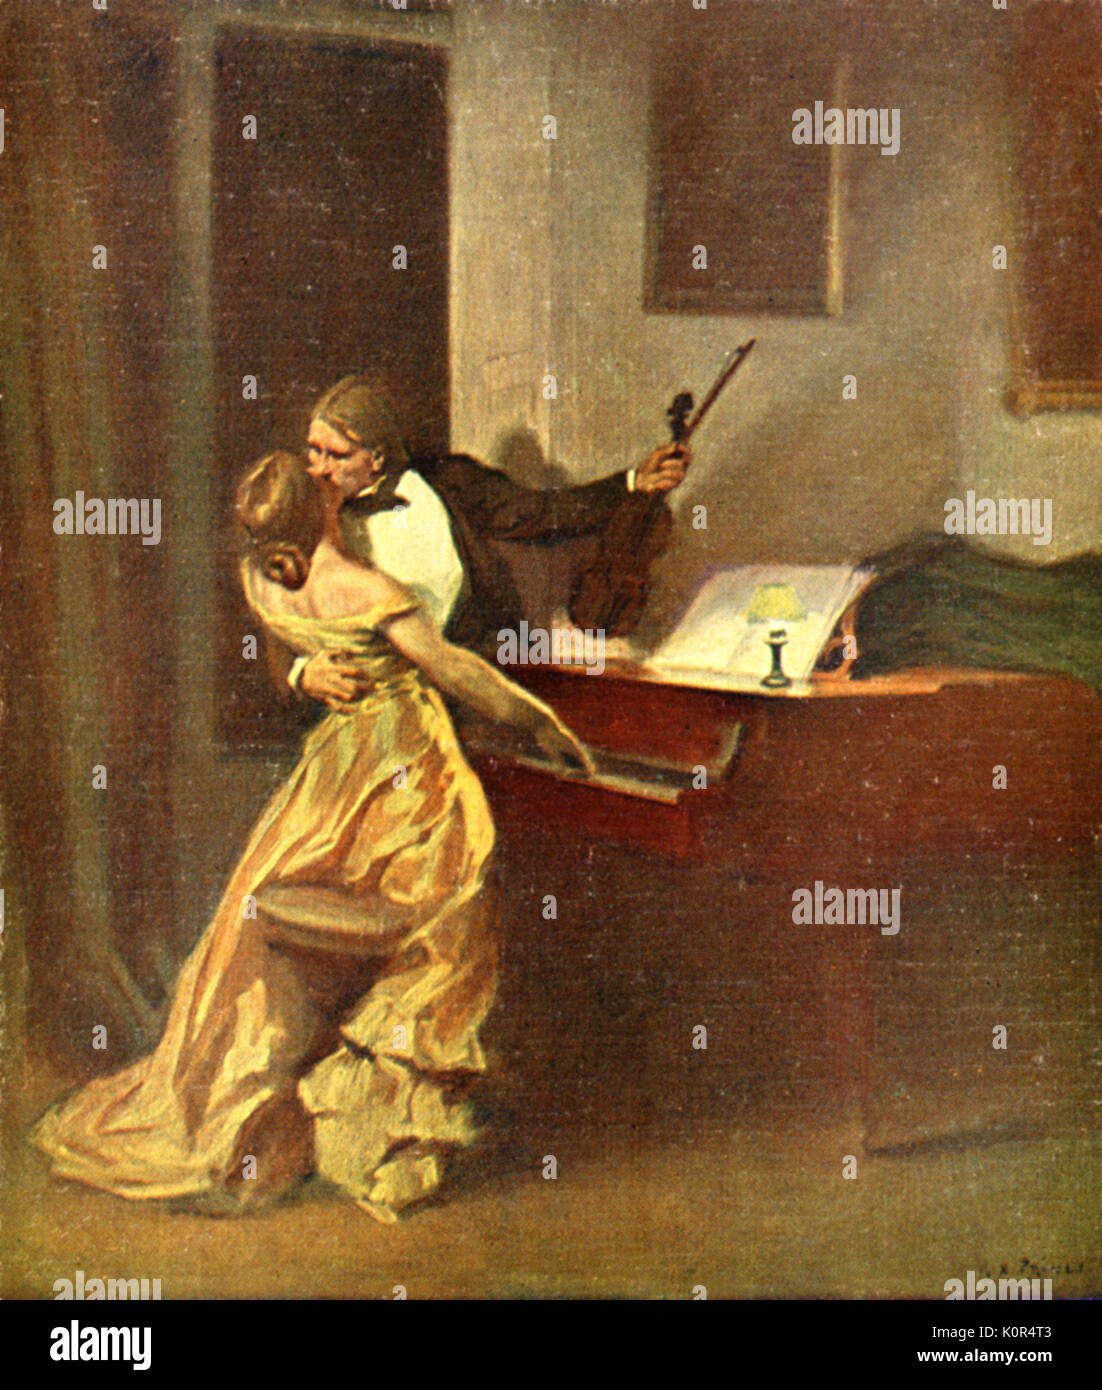 Chamber Music, Violin and Piano 'Kreutzer Sonata' by R. Prinet. Painting  late 19th century or early 20th century showing man with violin and woman  at piano embracing. (Love and the piano). Beethoven